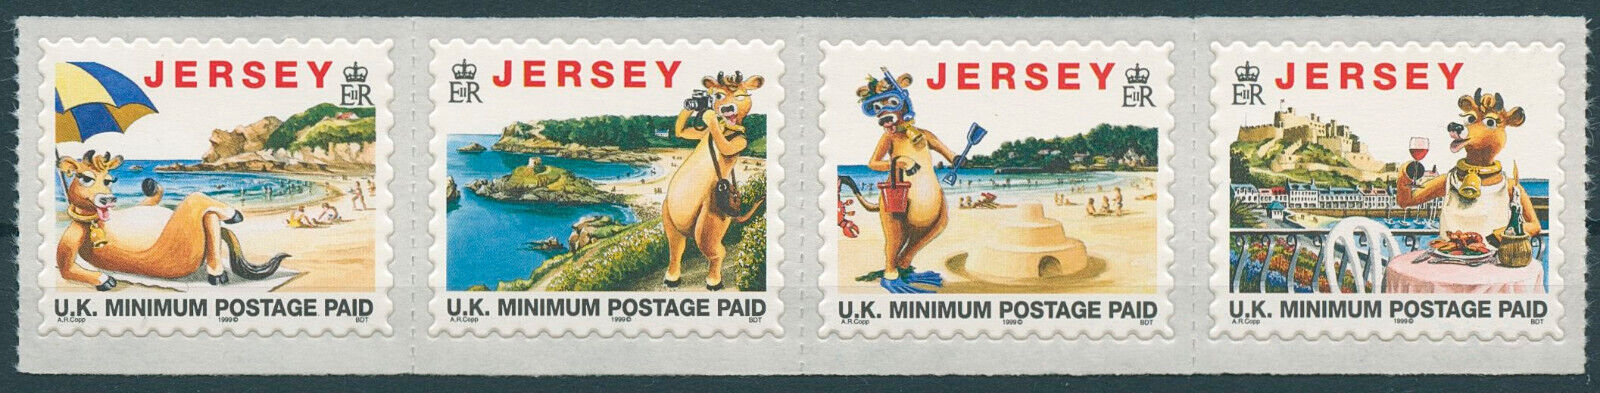 Jersey 1997 MNH Tourism Stamps Lillie the Cow Cows Landscapes 4v S/A Strip